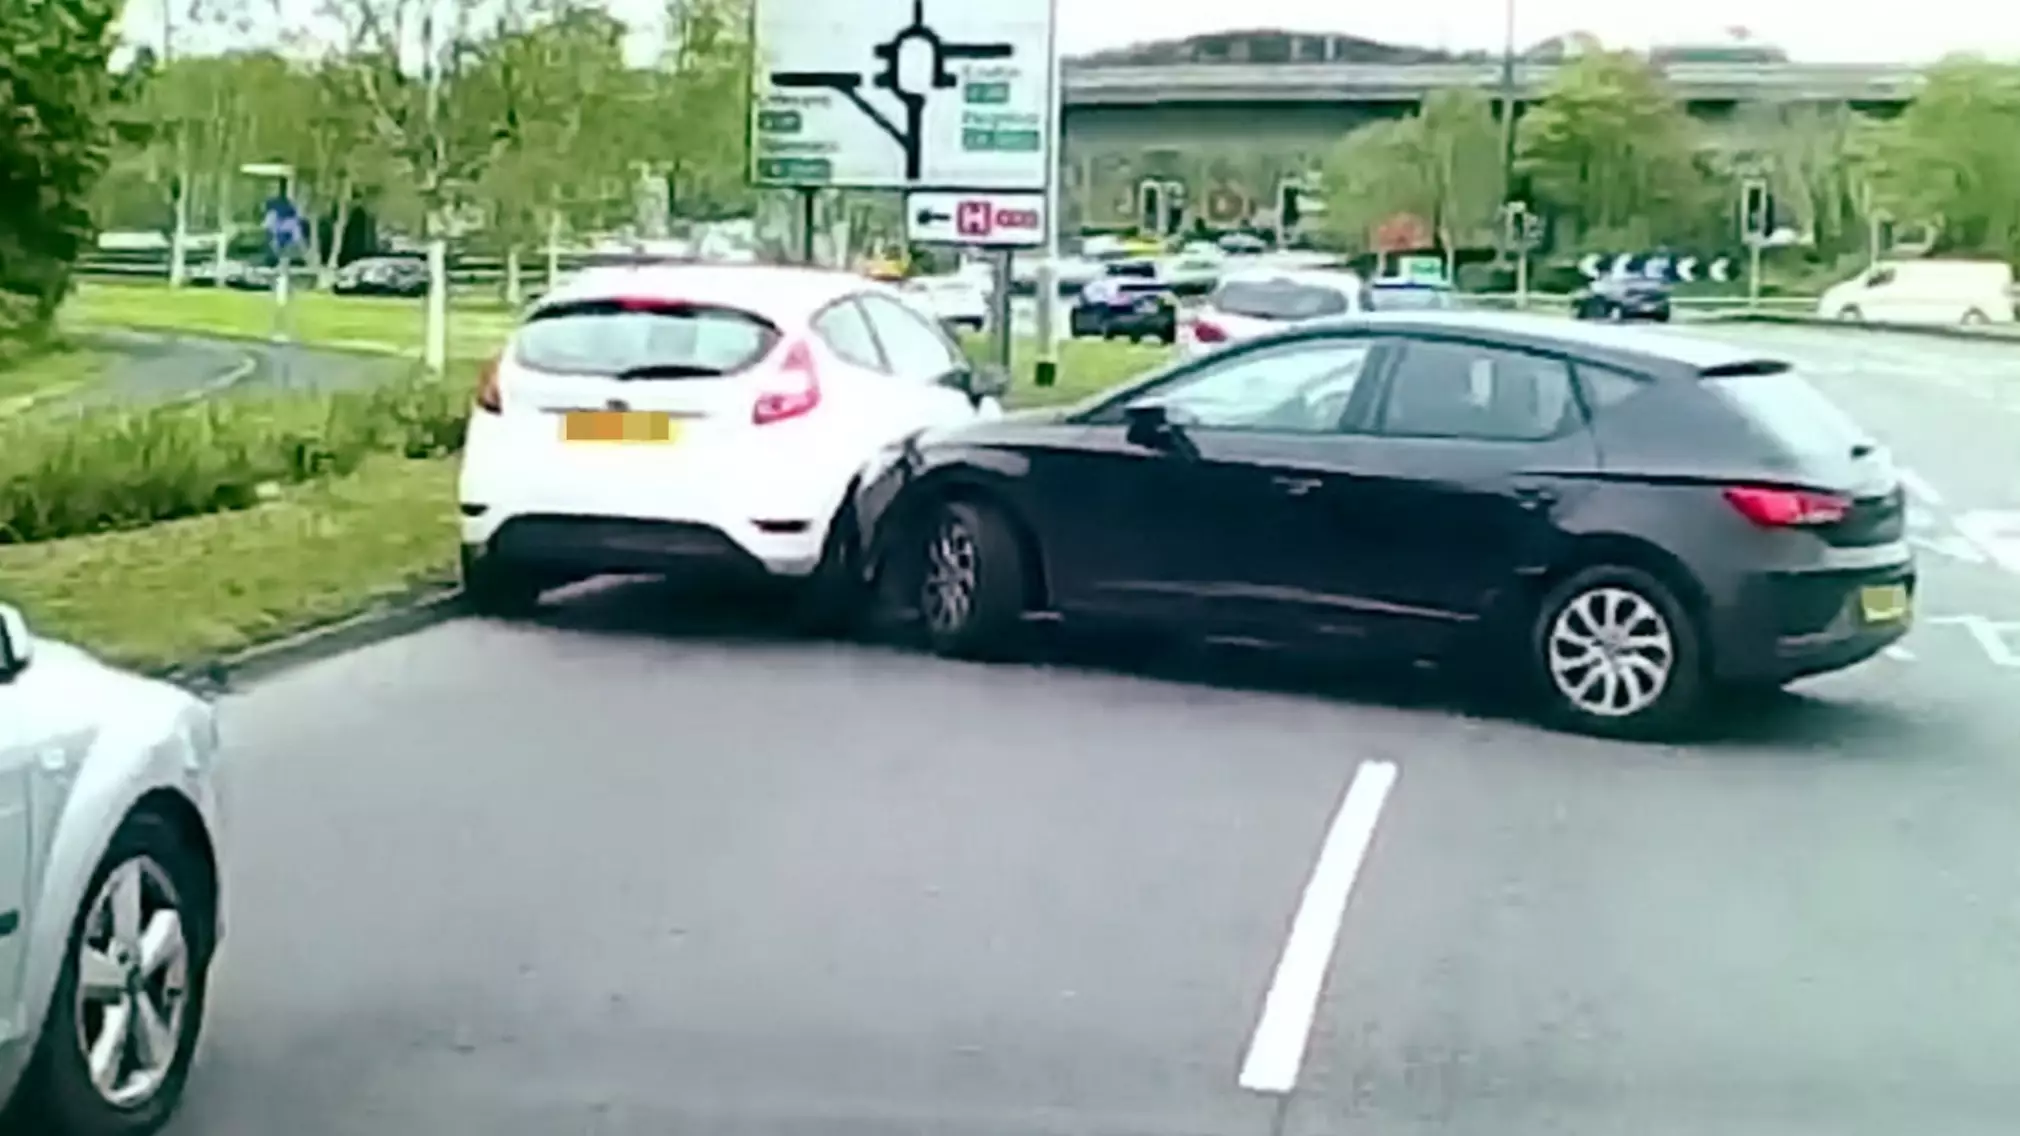 Shocking Dashcam Footage Shows Moment Car Appears To Ram Another Vehicle